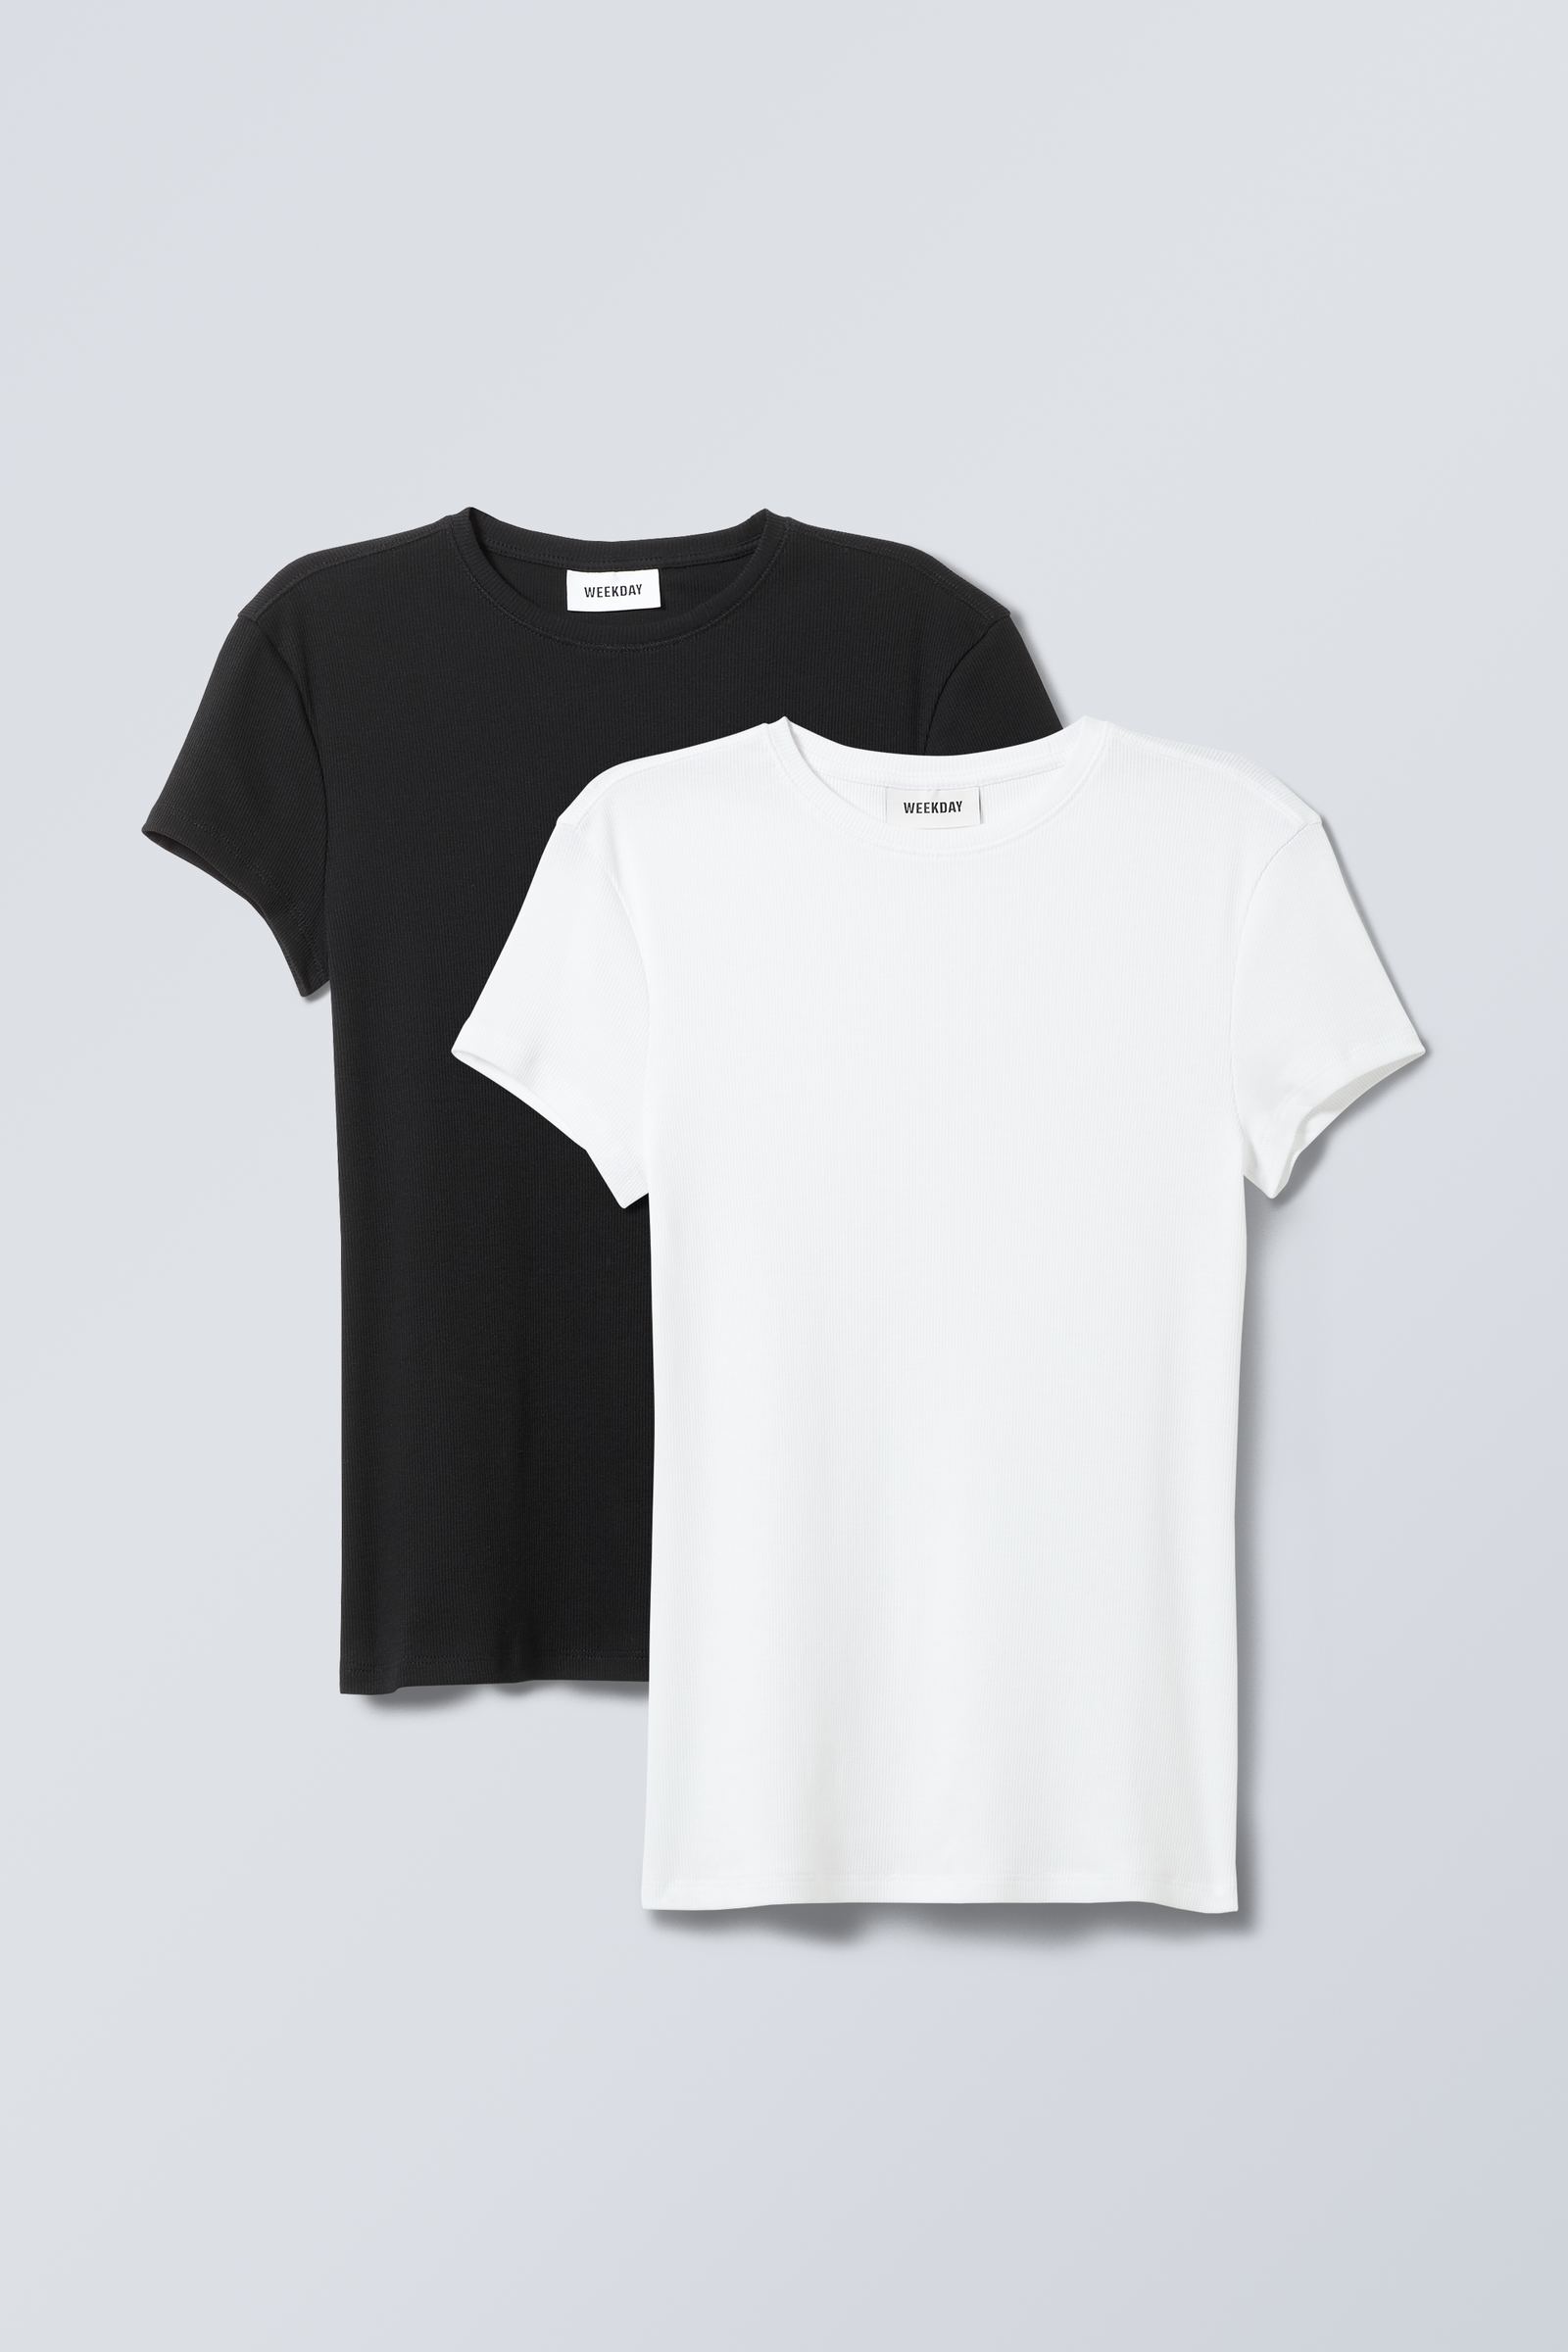 #272628 - 2-pack Close Fitted Rib T-shirt - 1